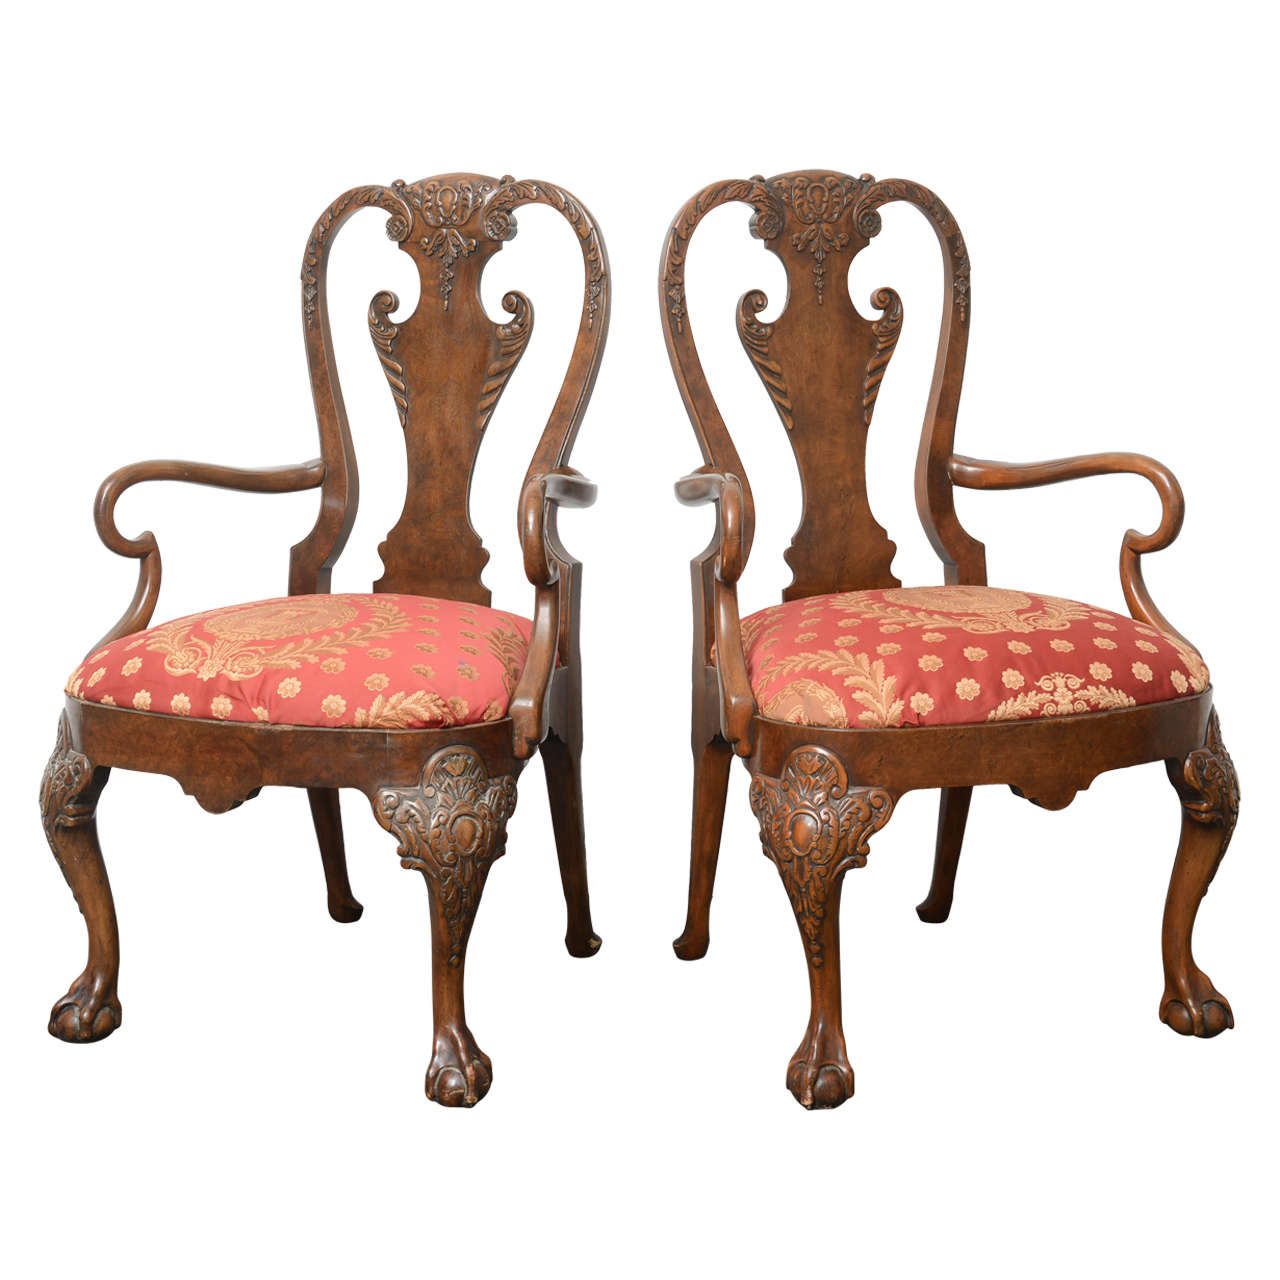 Superb Pair of Mahogany Armchairs by Bakers